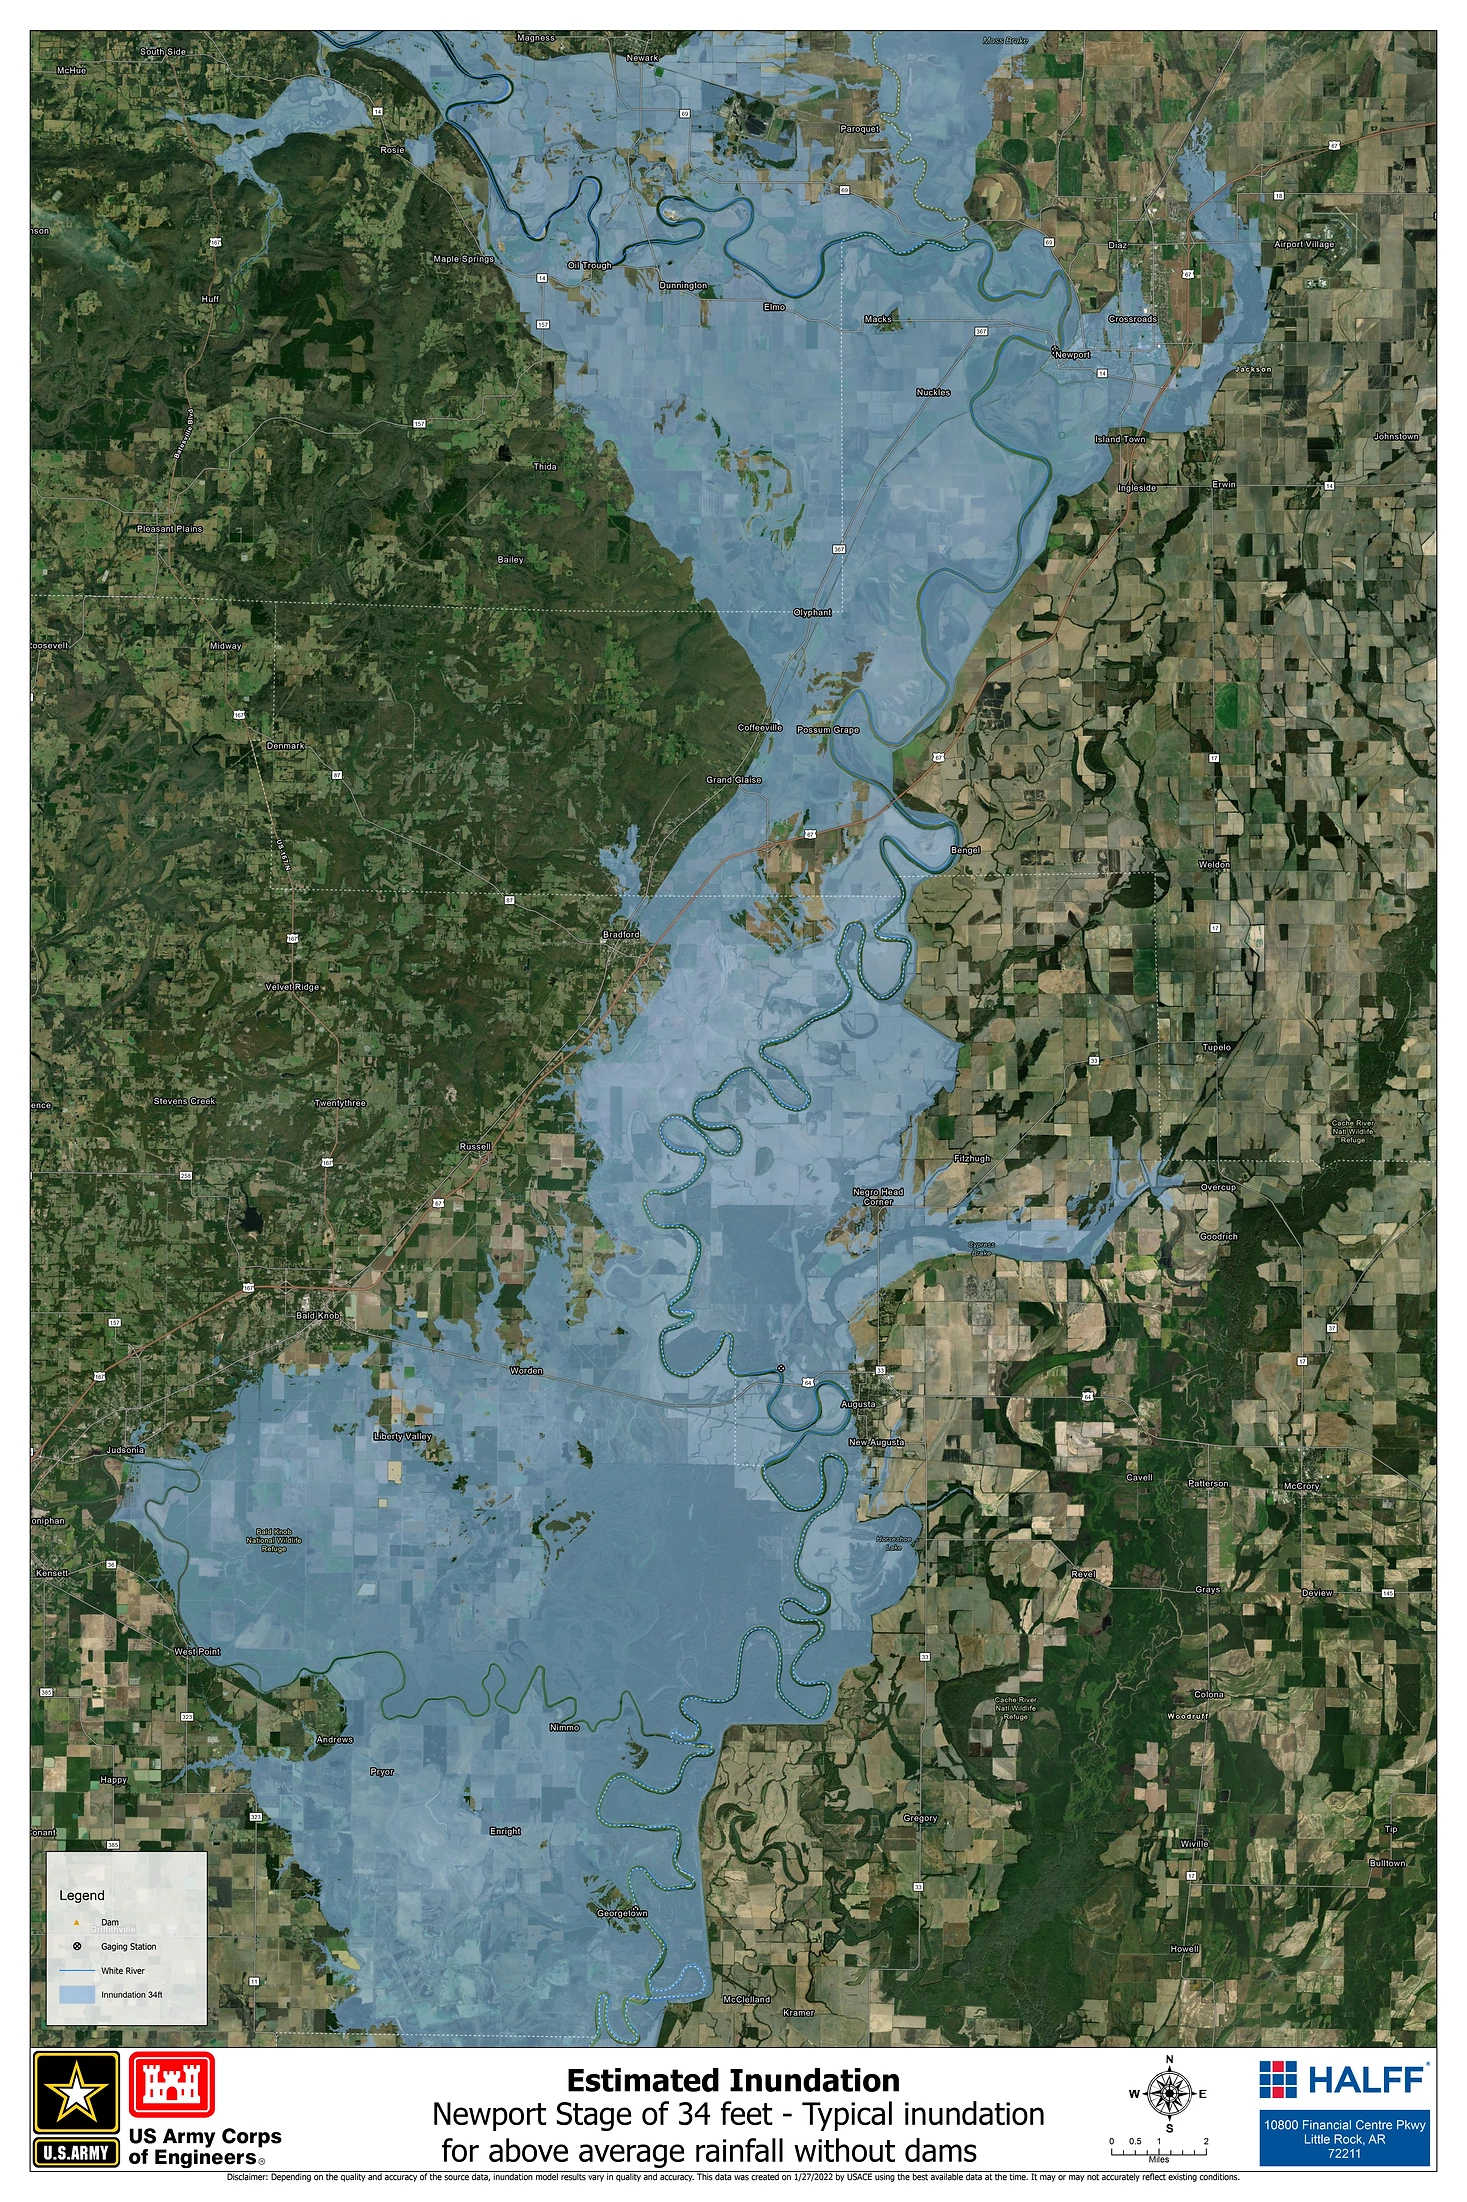 map of newport estimated inundation at 34 feet